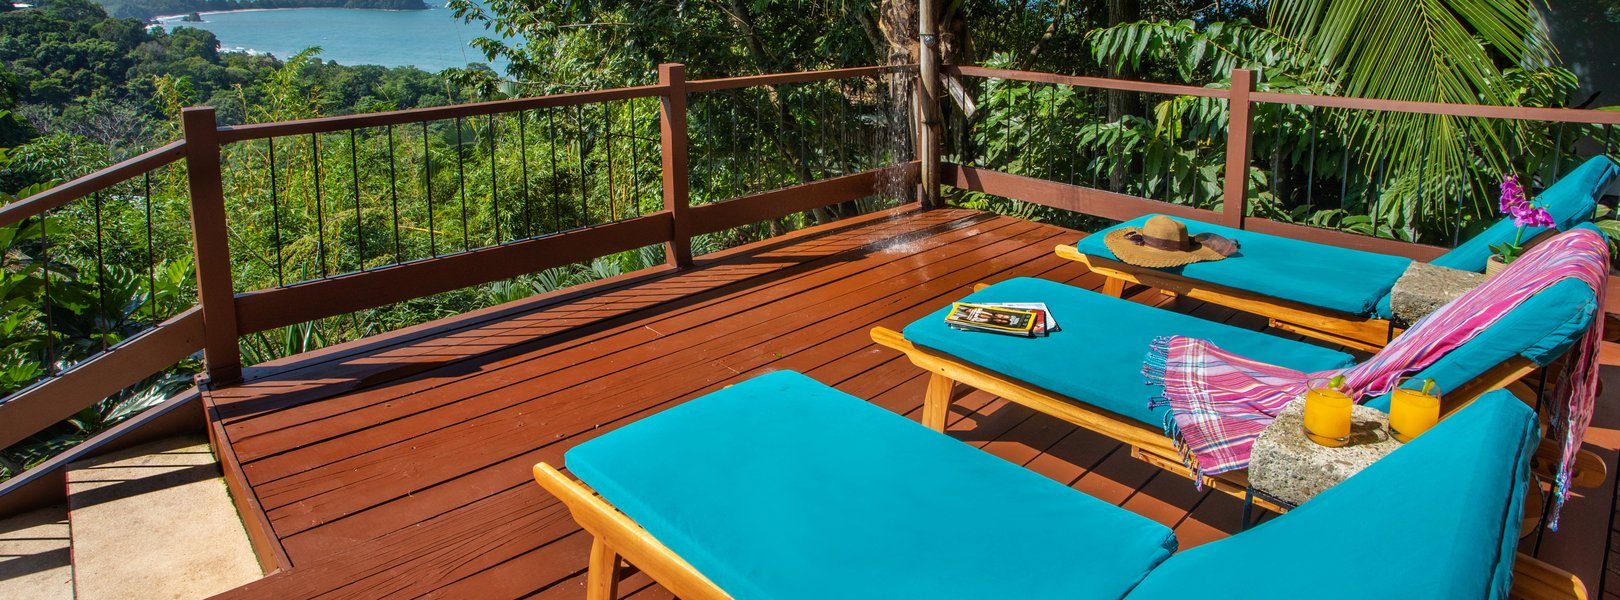 Lounge under the Manuel Antonio sun with ocean views from heaven.